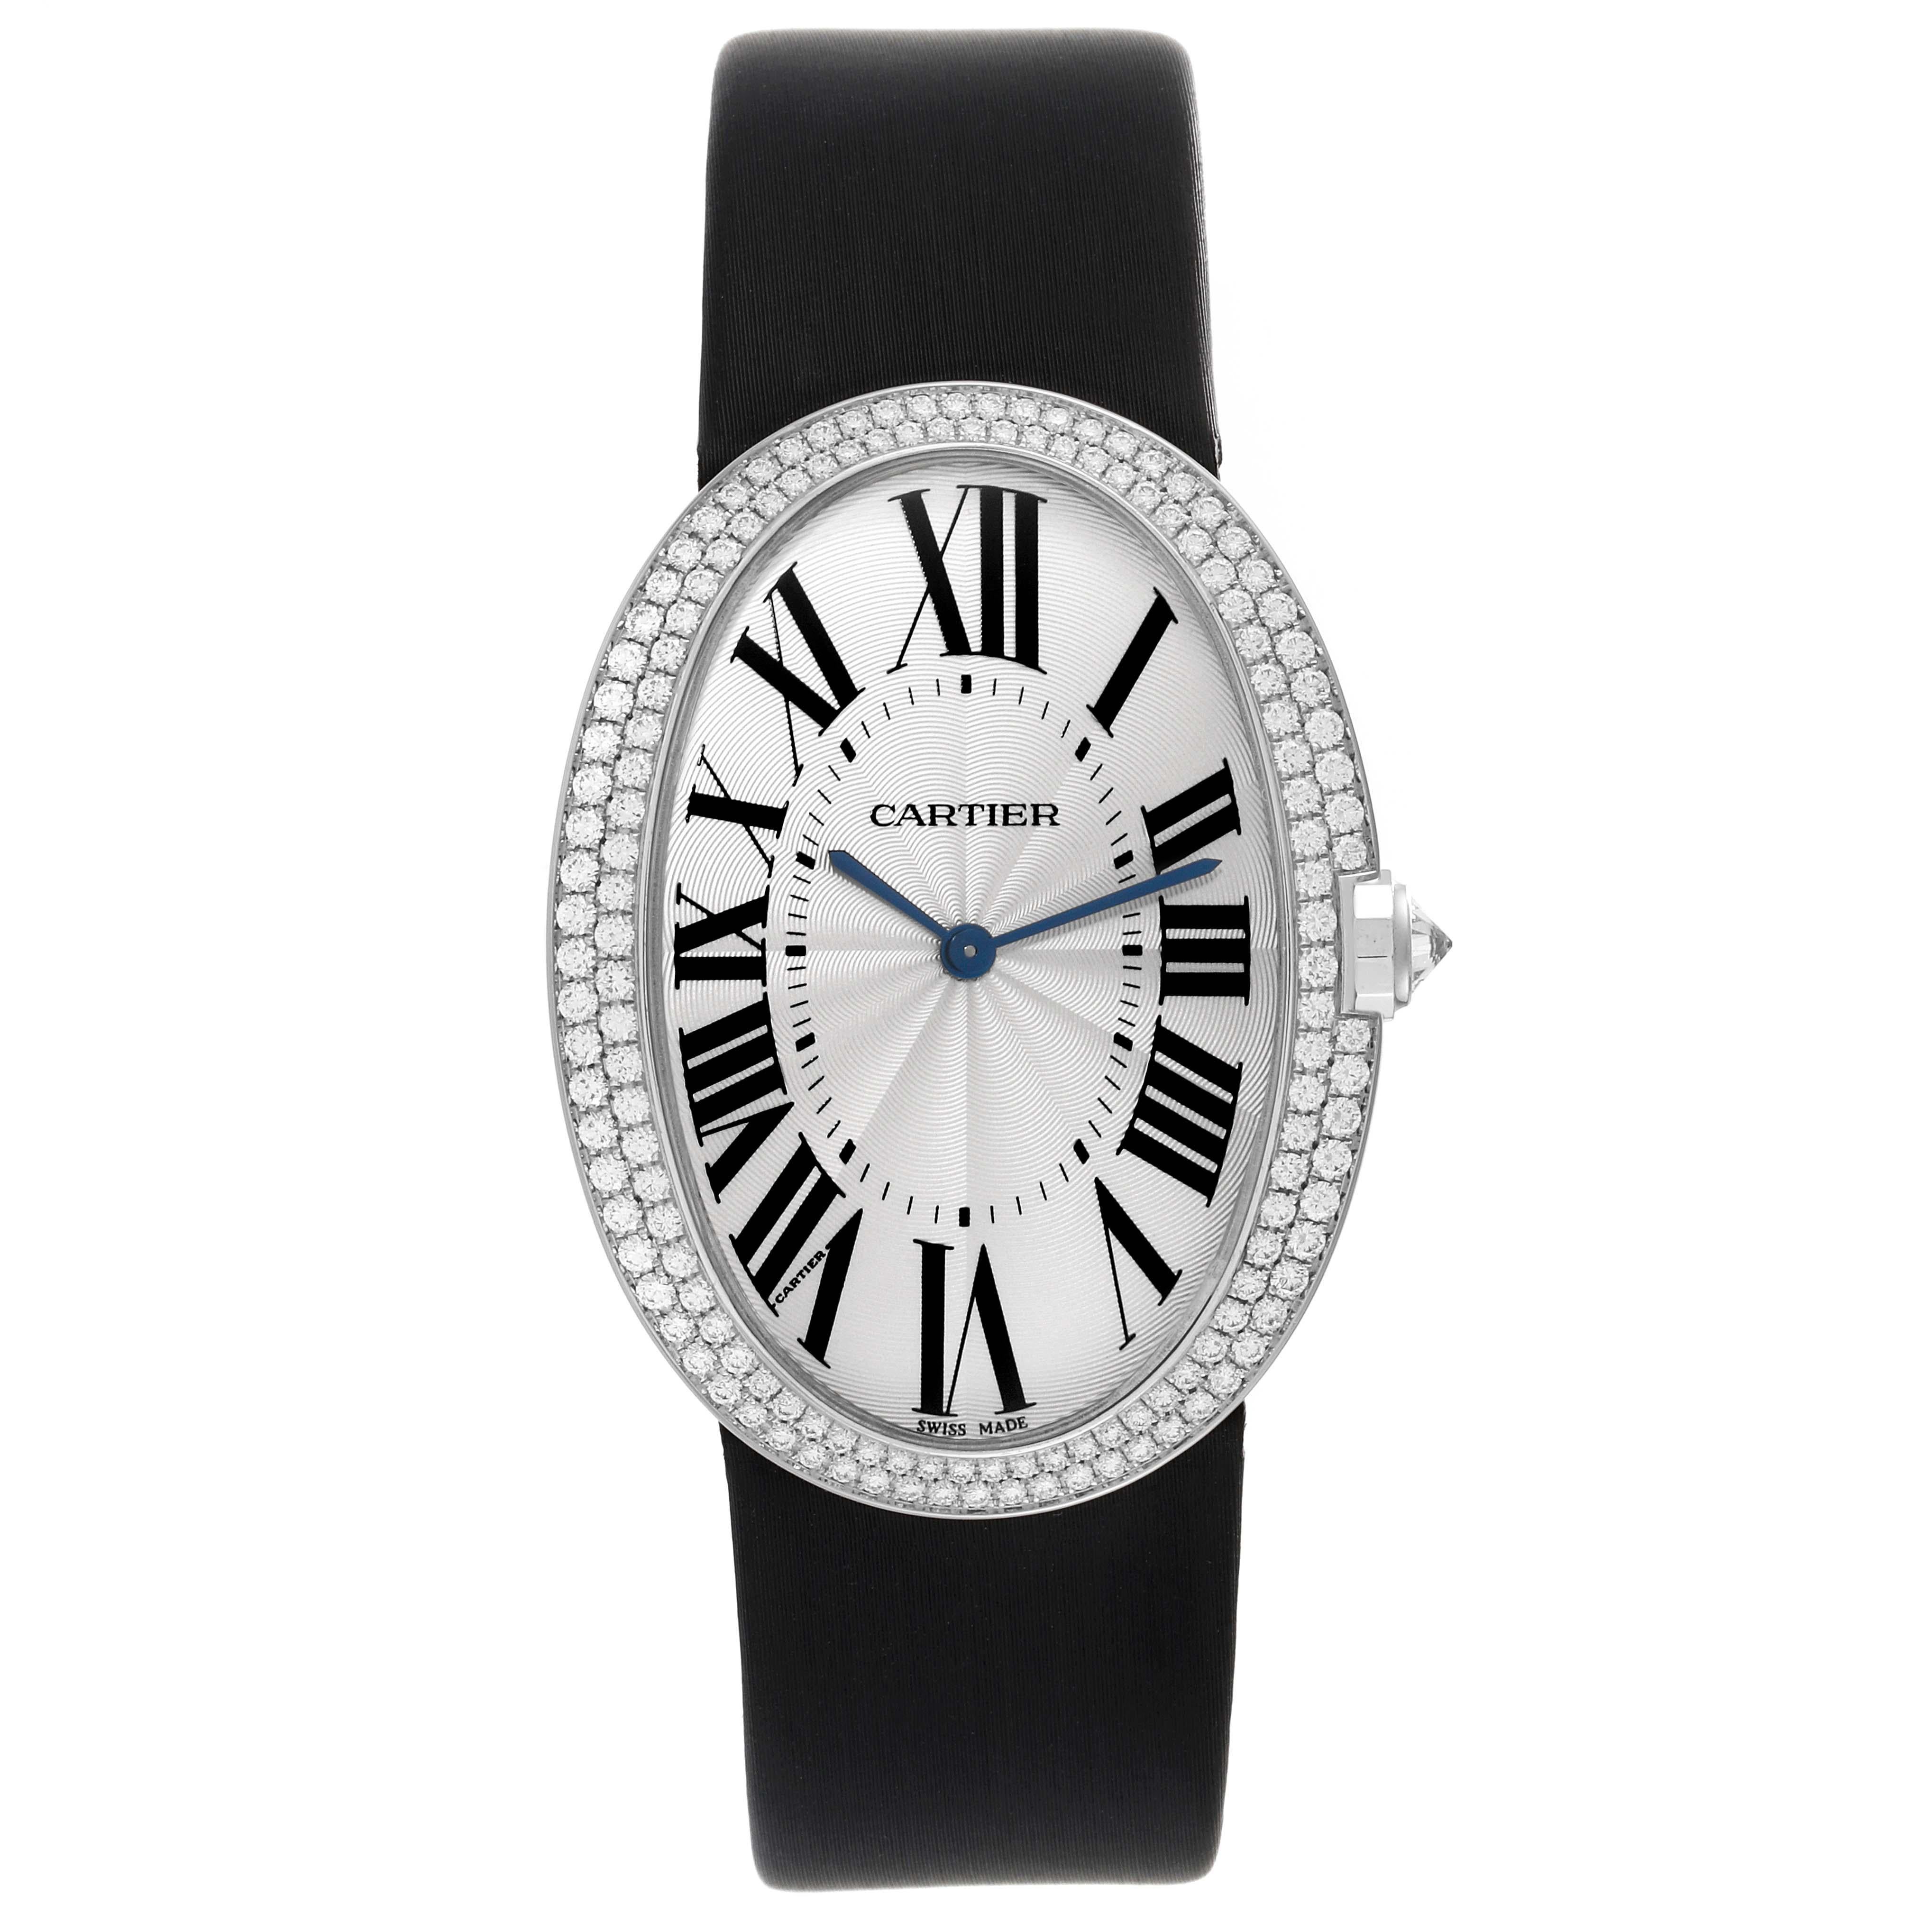 Cartier Baignoire Large White Gold Diamond Ladies Watch WB520009 Box Card In Excellent Condition For Sale In Atlanta, GA